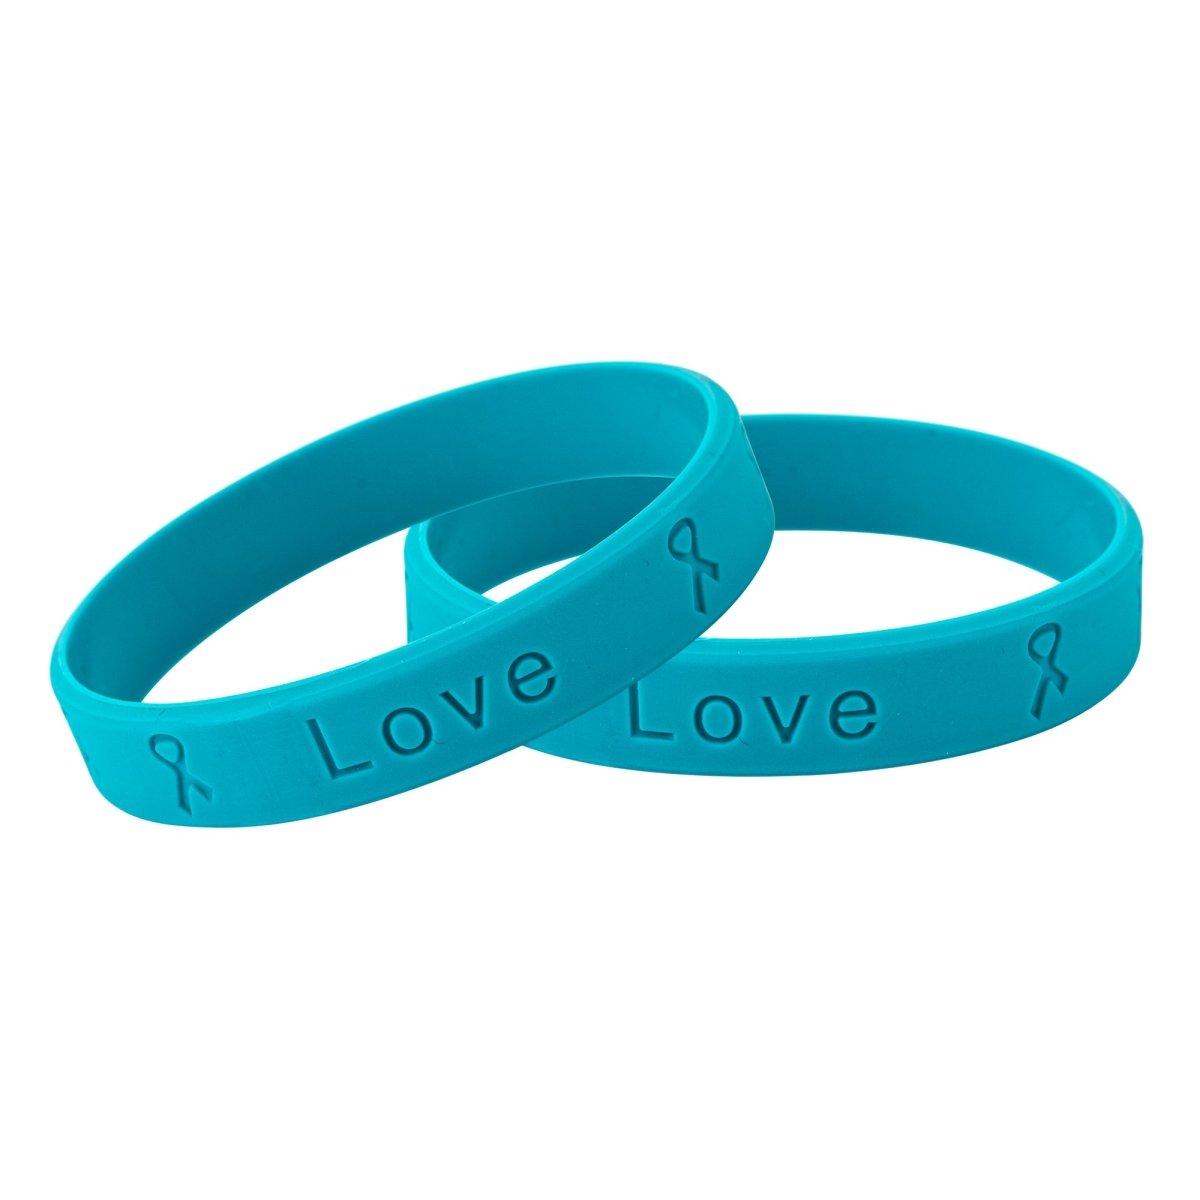 Adult Ovarian Cancer Awareness Silicone Bracelet Wristbands - Fundraising For A Cause